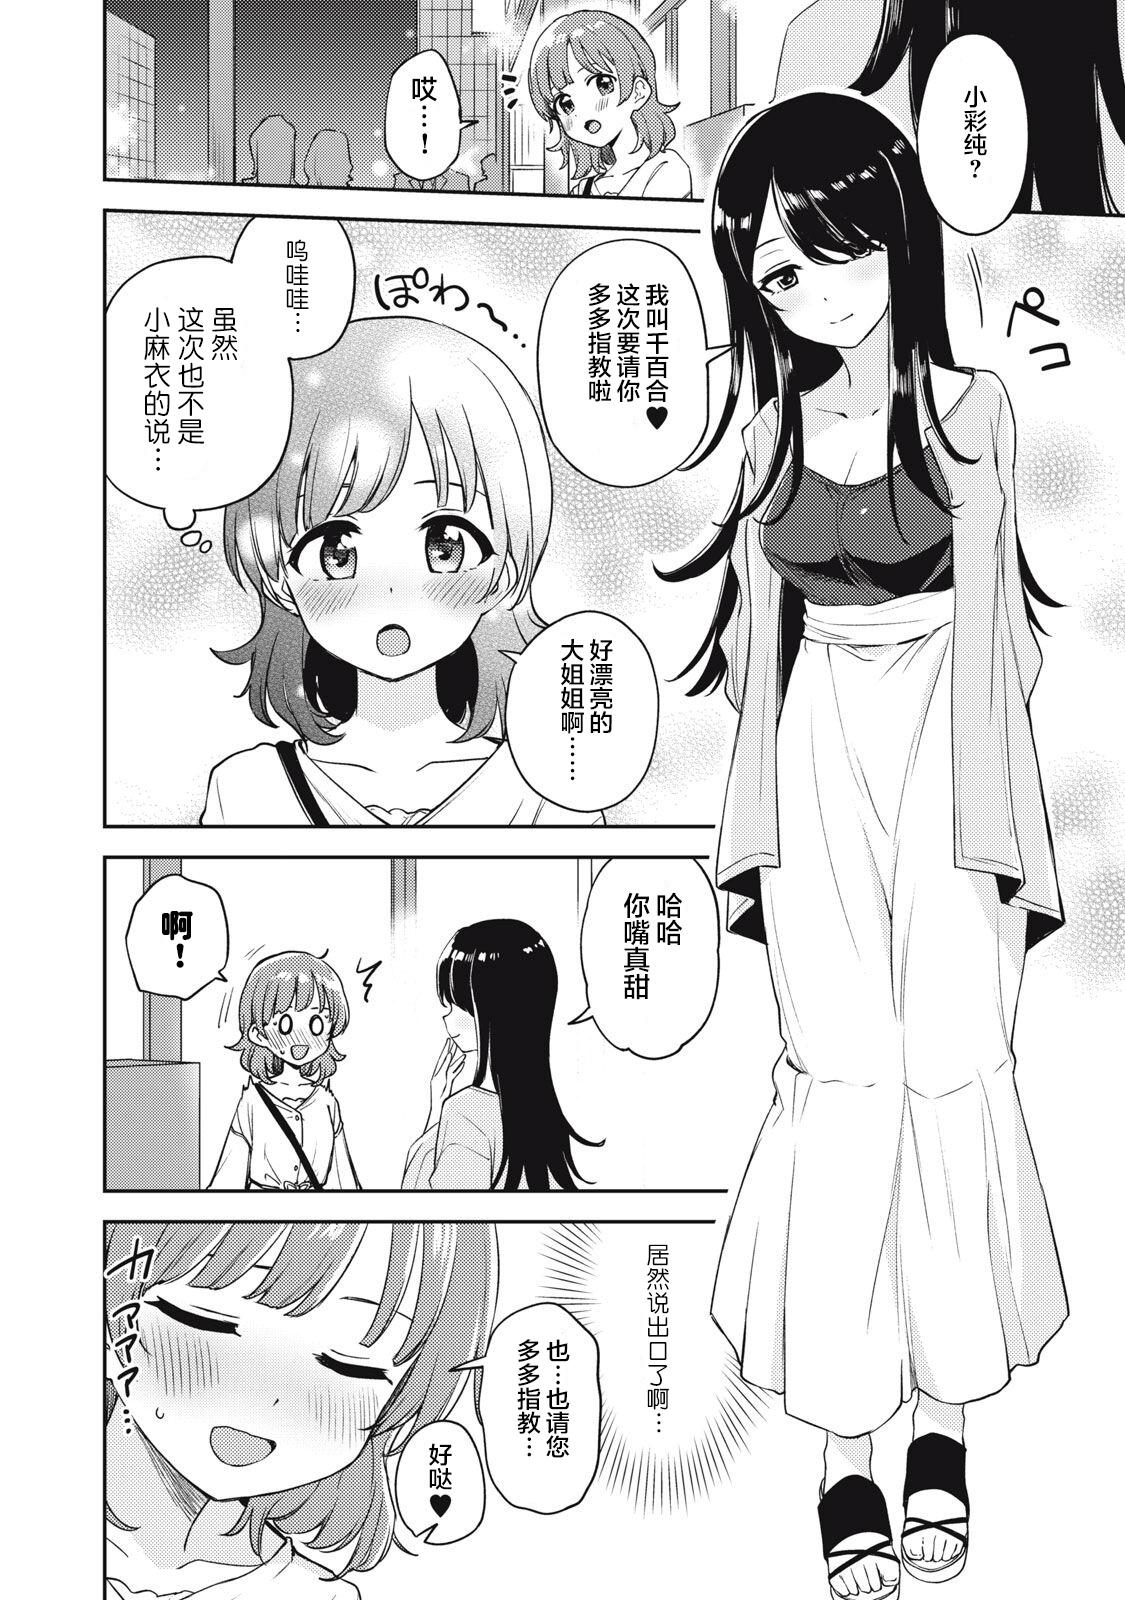 Facesitting Asumi-chan Is Interested In Lesbian Brothels! Extra Episode Seduction Porn - Page 2